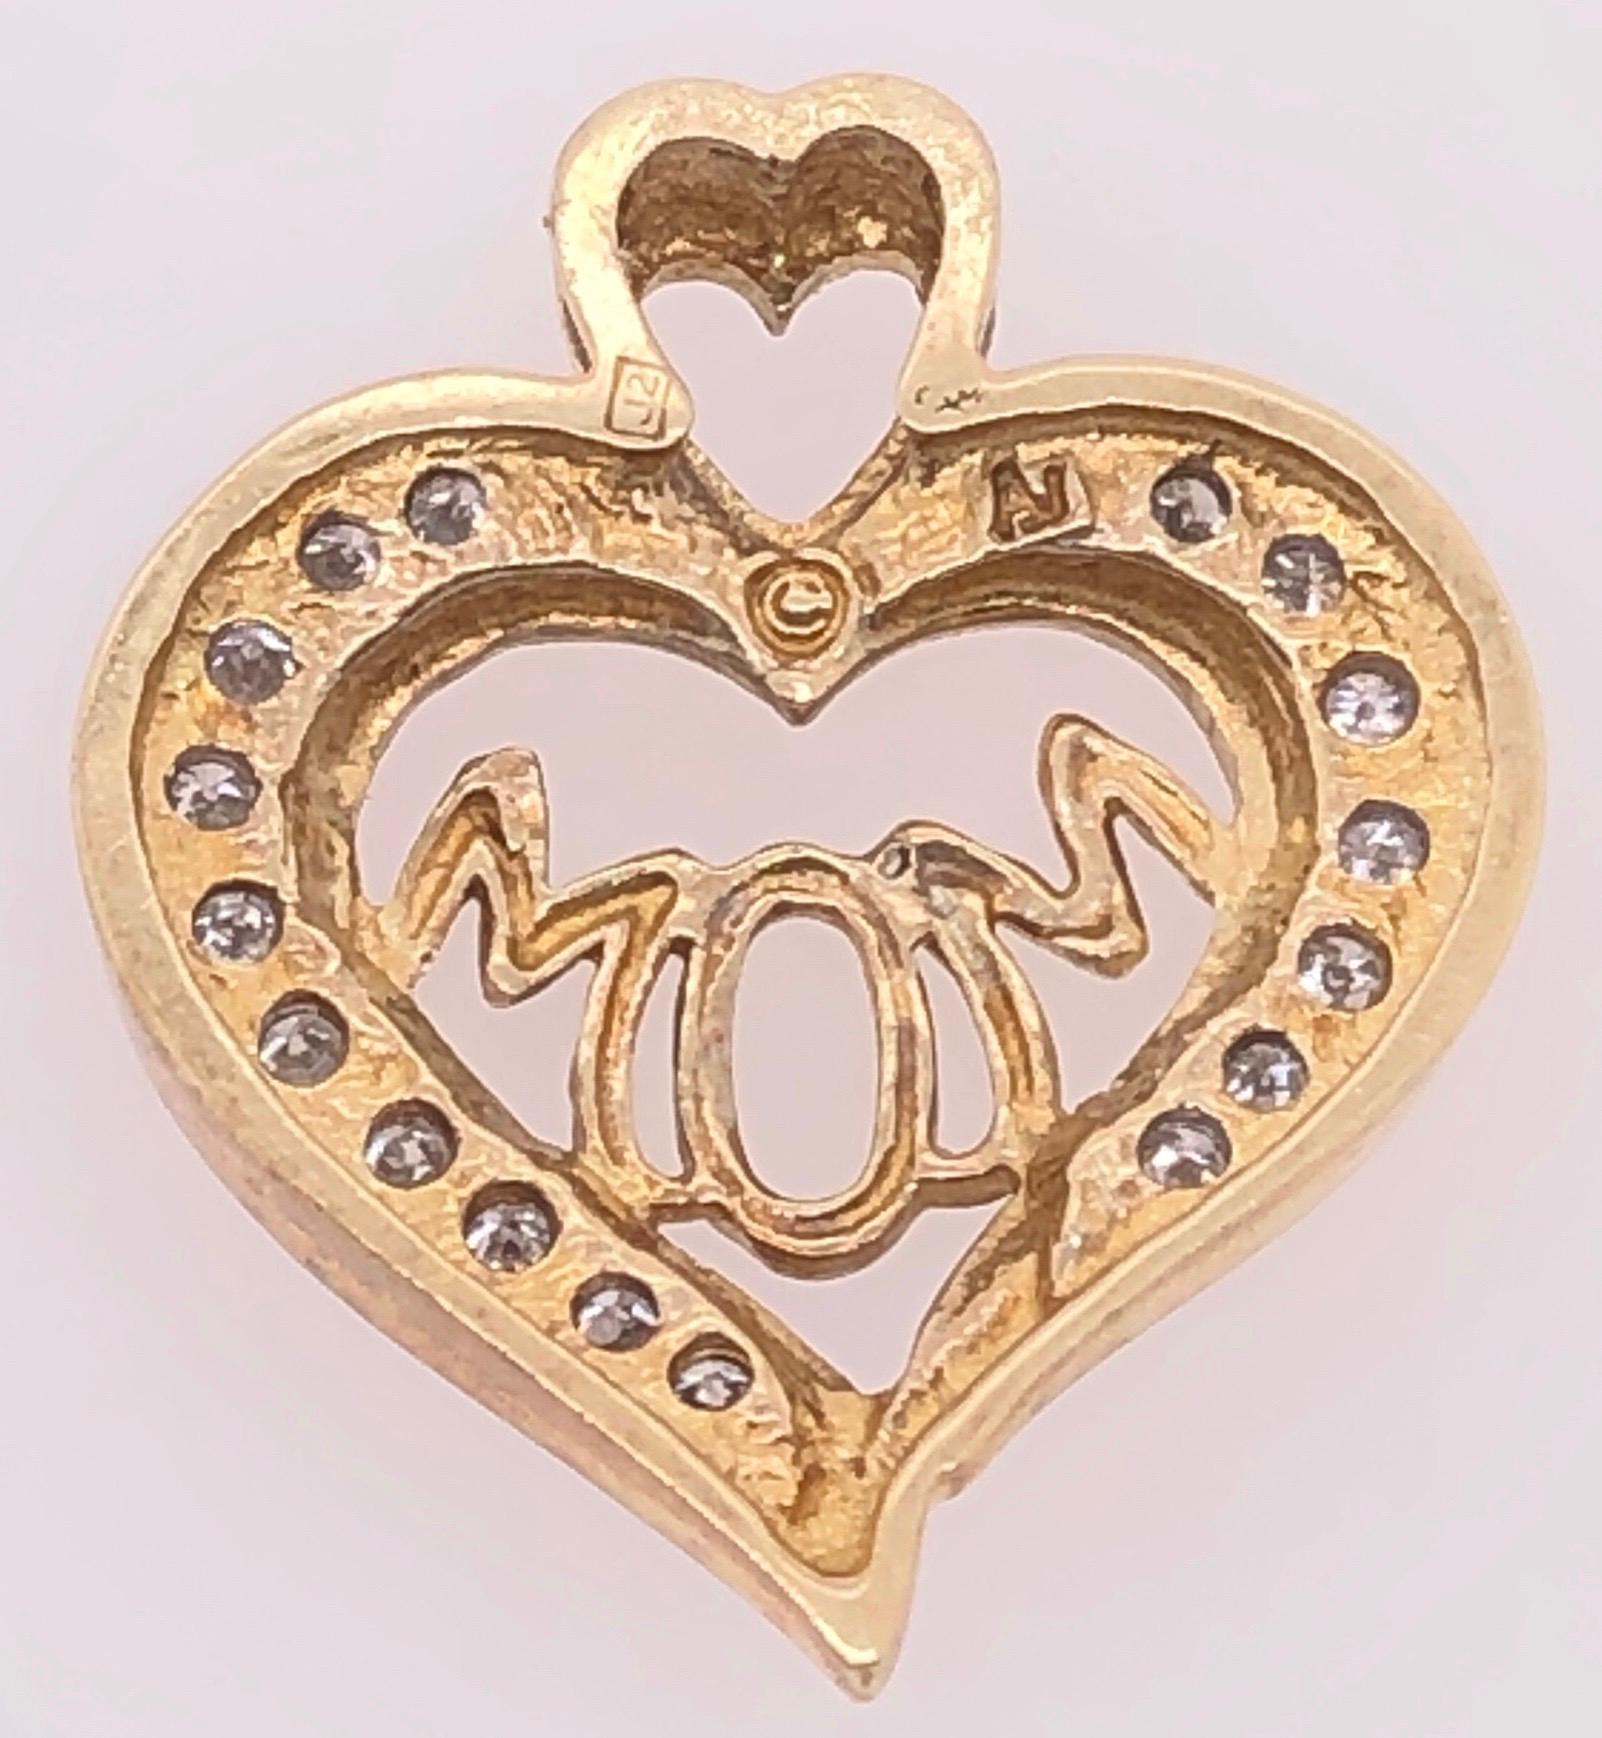 14 Karat Two Tone Gold And Diamond Heart Charm Pendant With MOM Center 0.60 TDW.
2.83 grams total weight.